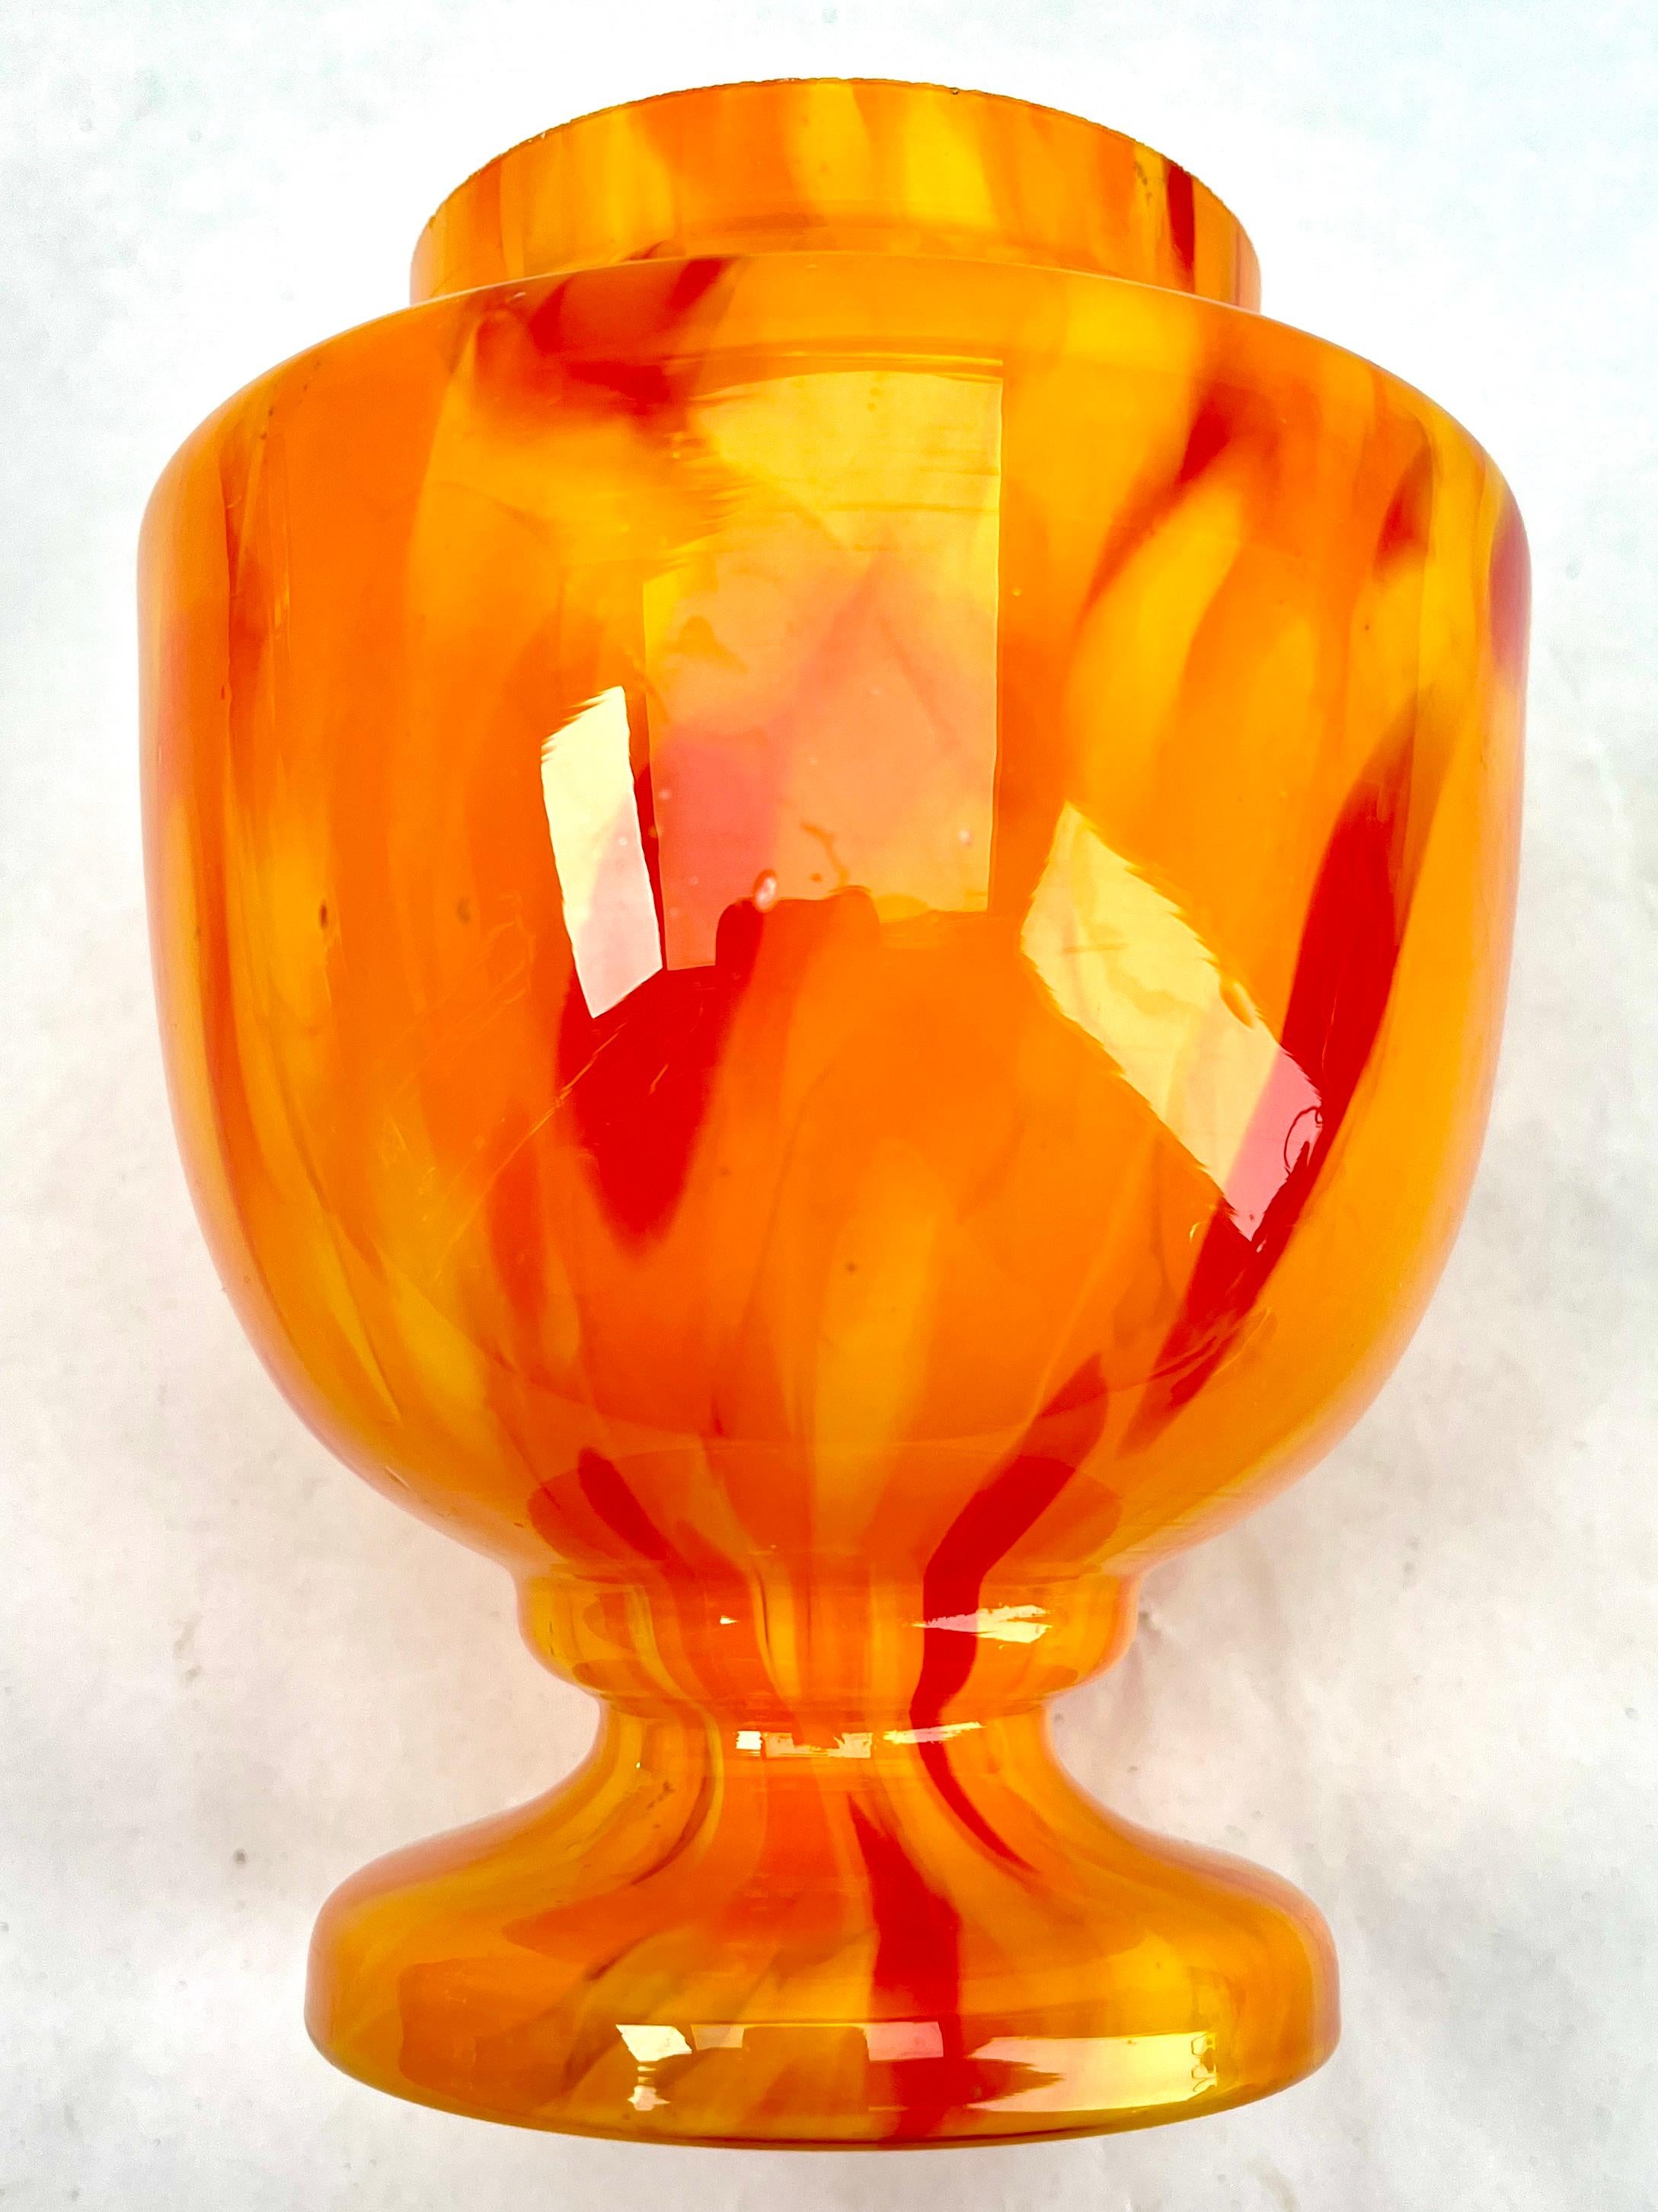 Dramatic multi color decor, cobalt and orange, in hand blown splatter glass vase in the Art Deco style. This design for vases is often called 'Pique fleurs' or 'rose-bowl' and is supplied with a fitted metal grille to support stems in an